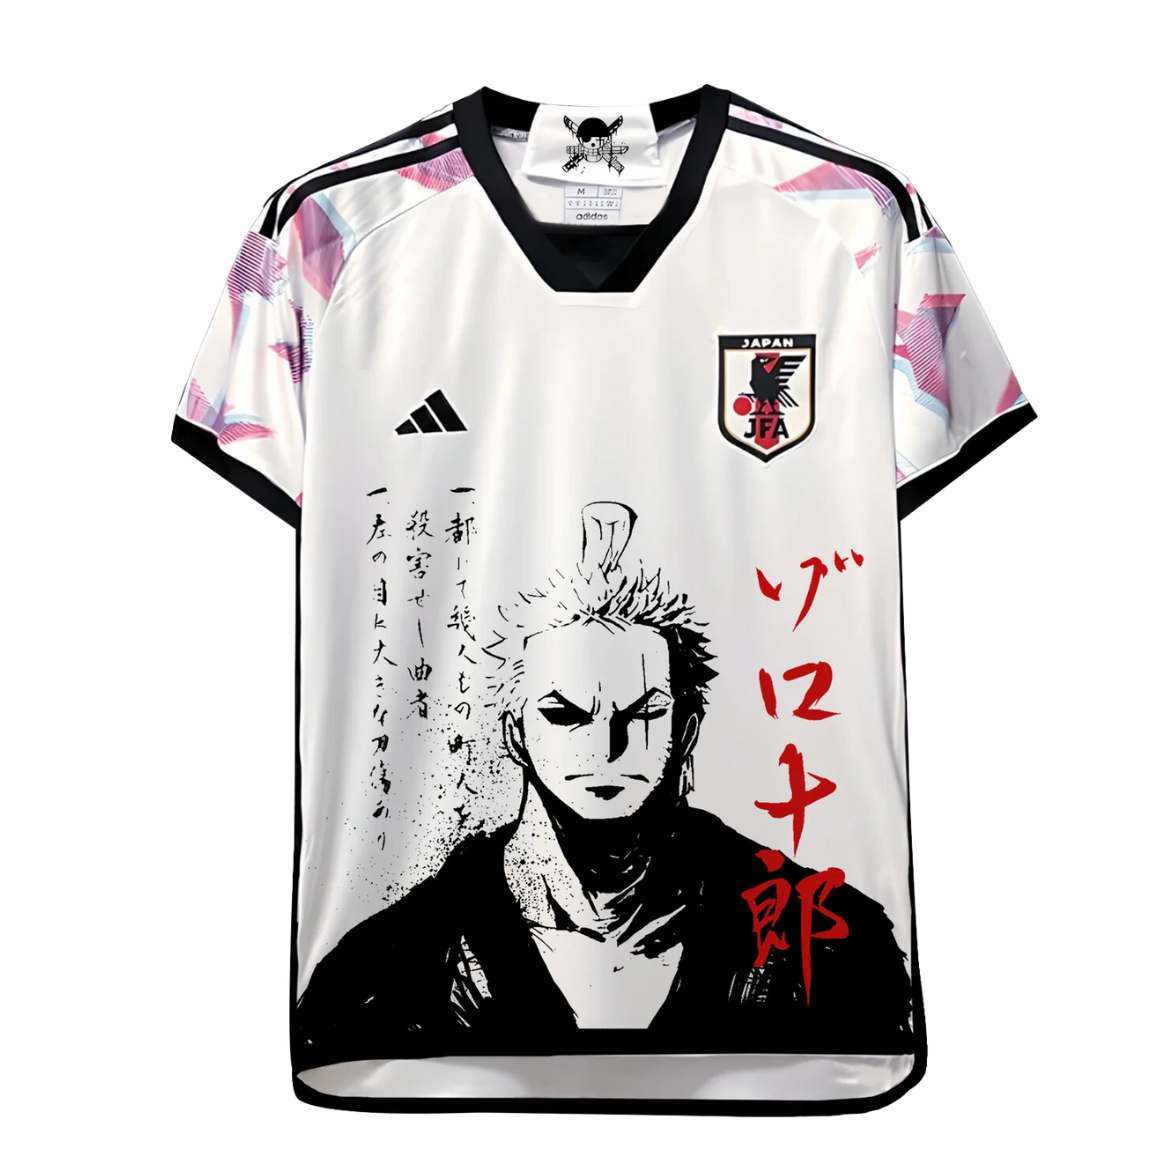 23/24 Japan x Zoro Limited Edition Jersey